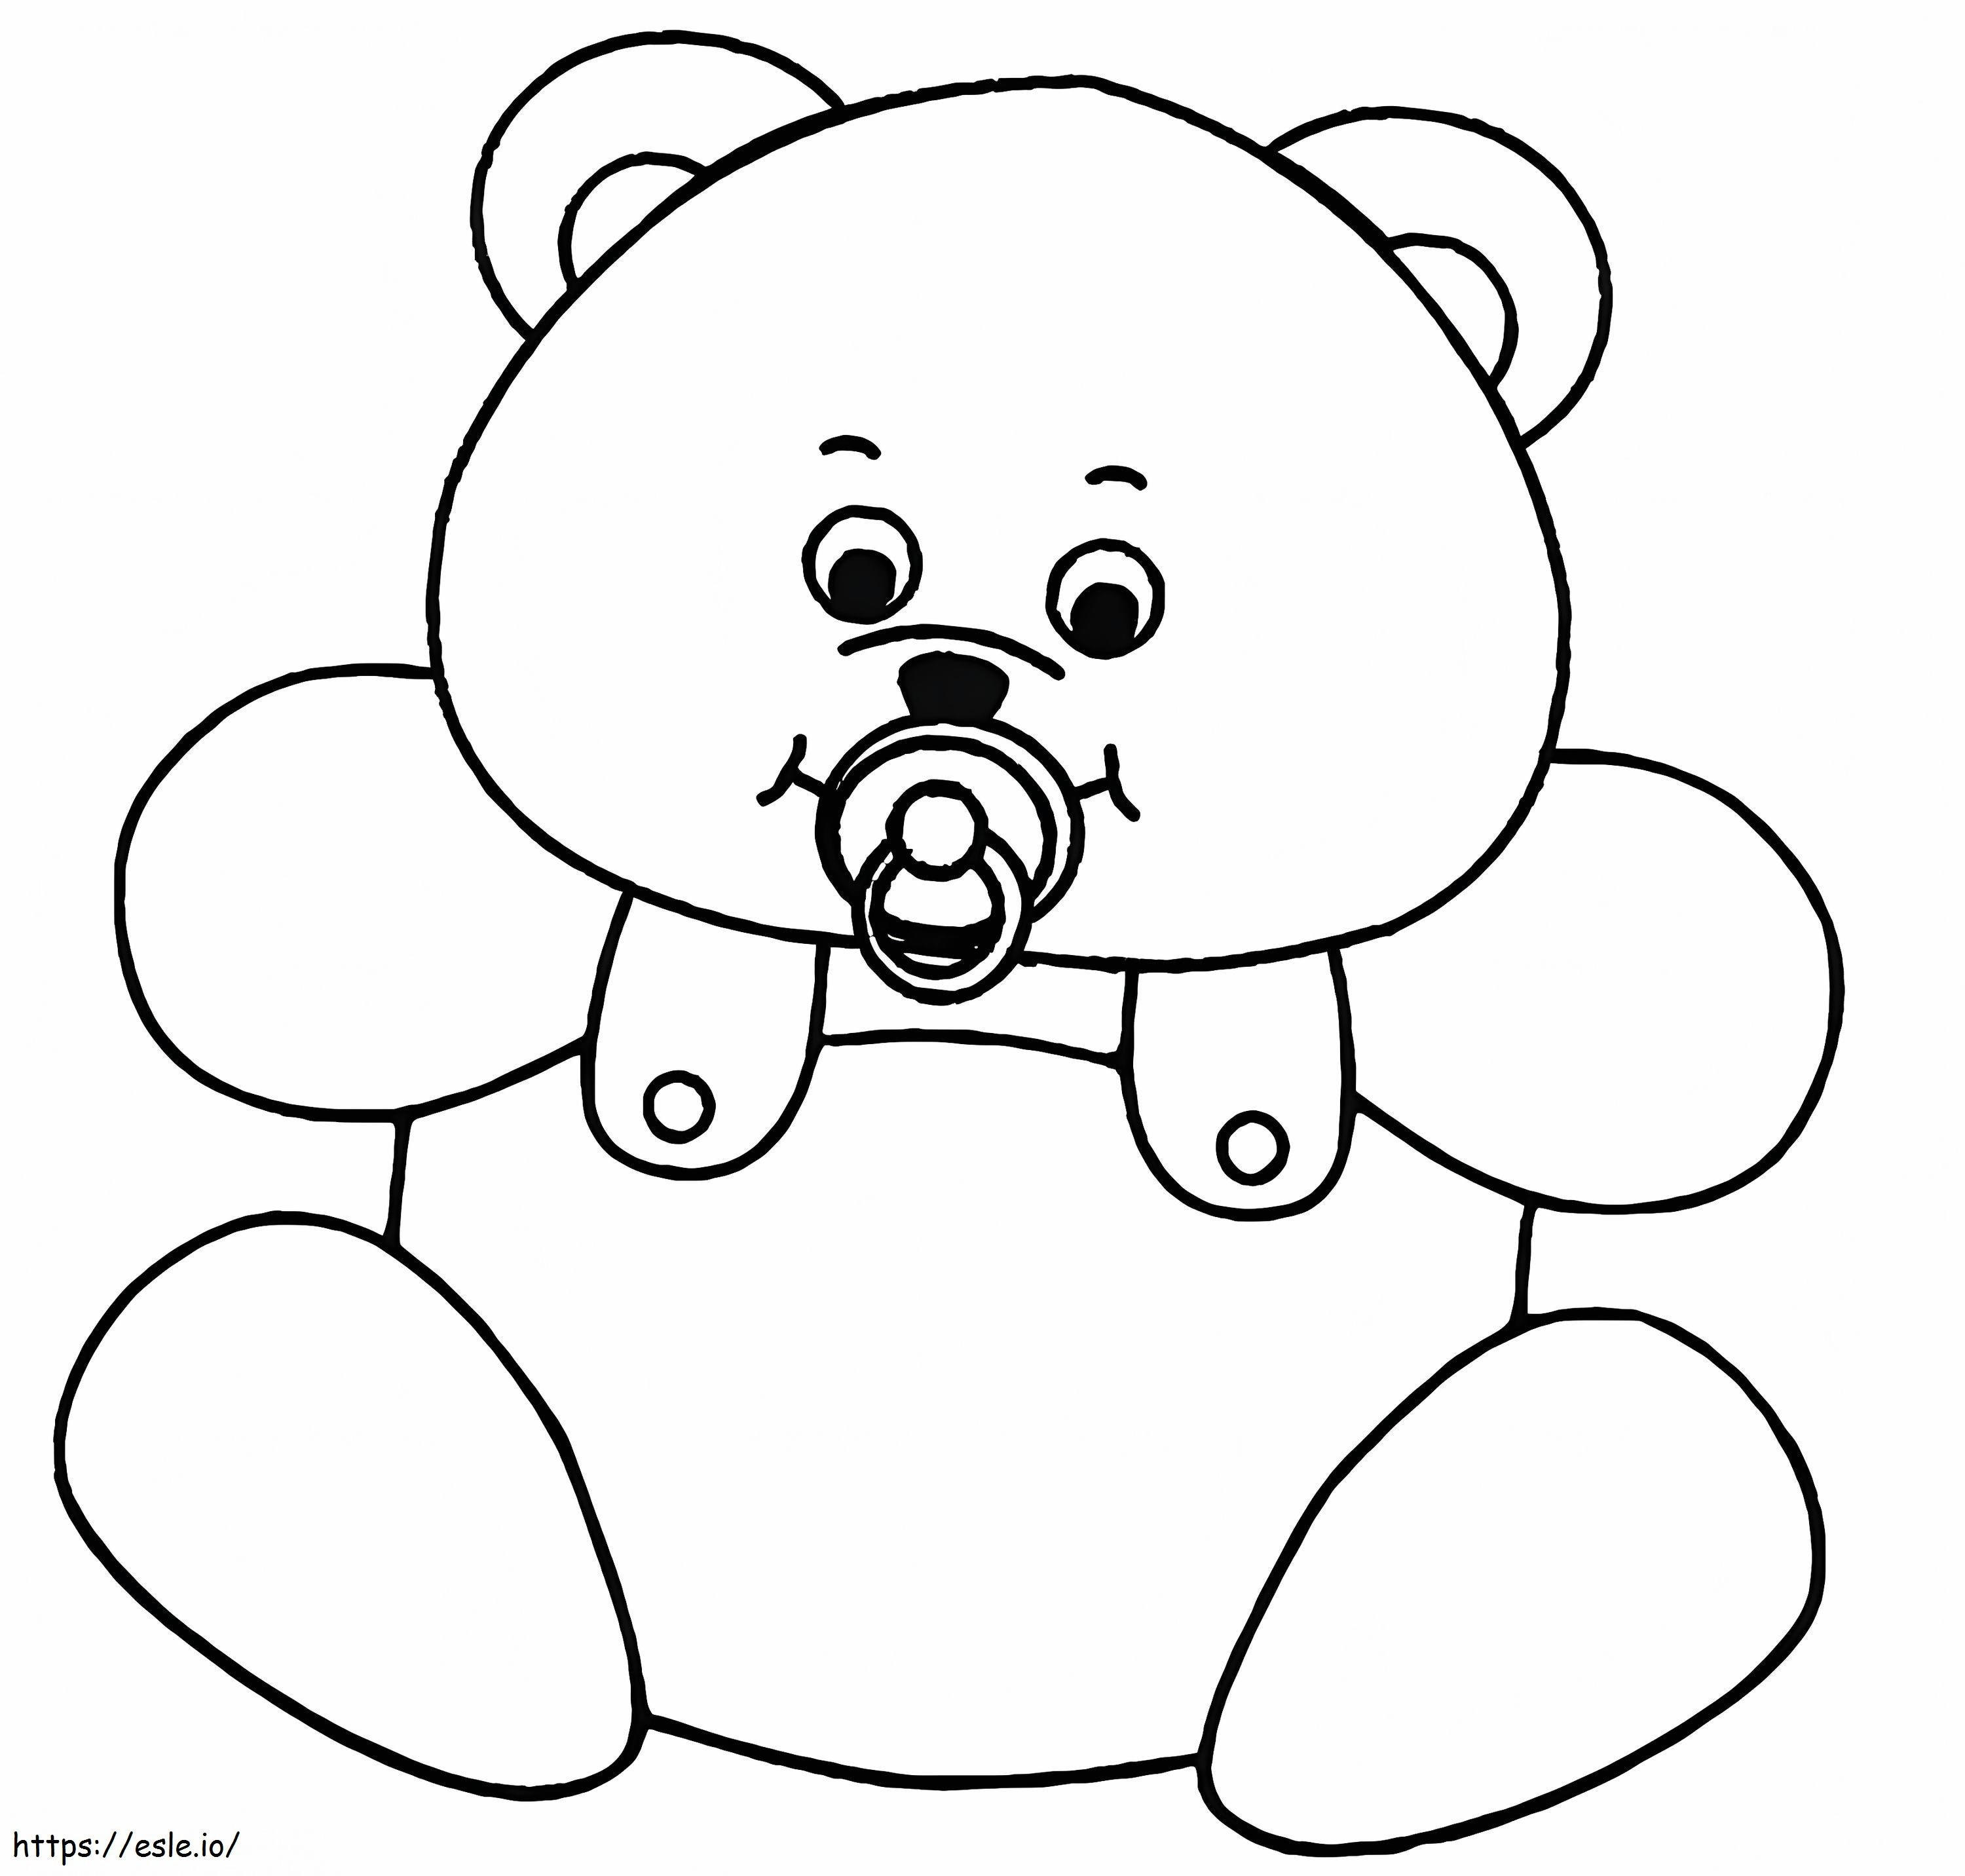 Baby Teddy Bear coloring page